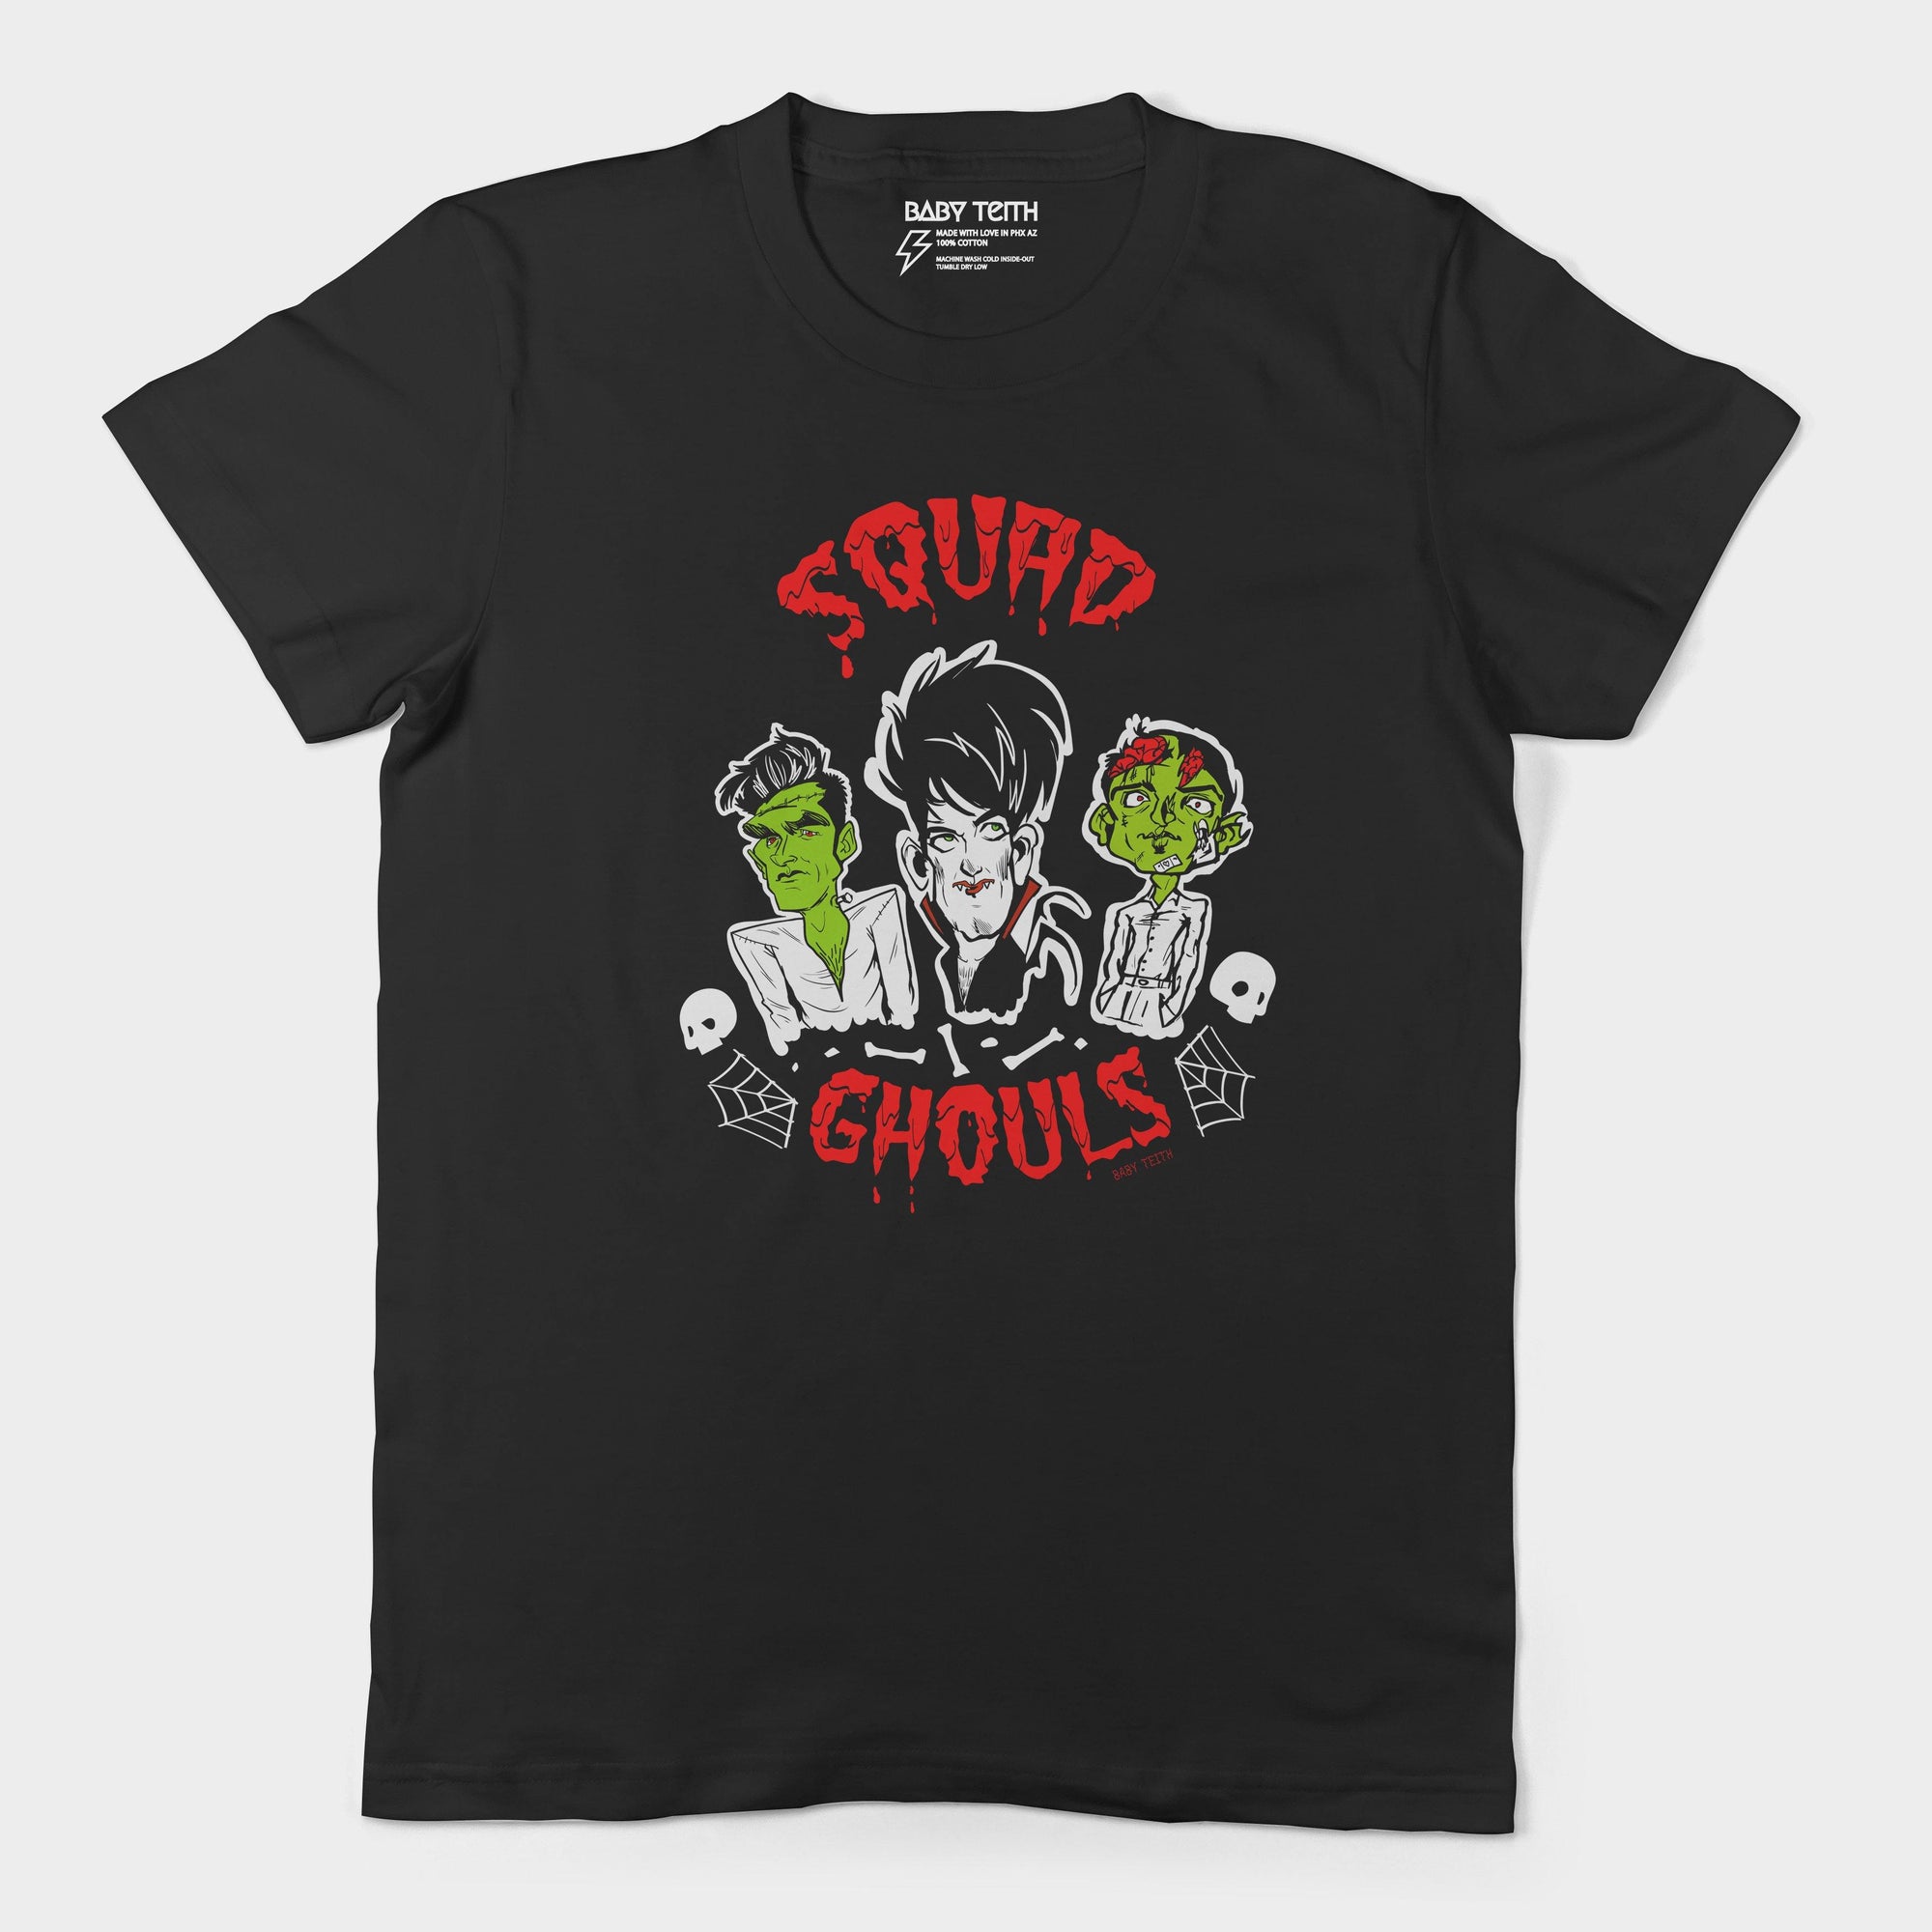 Squad Ghouls Halloween Unisex Tee for Adults - Baby Teith